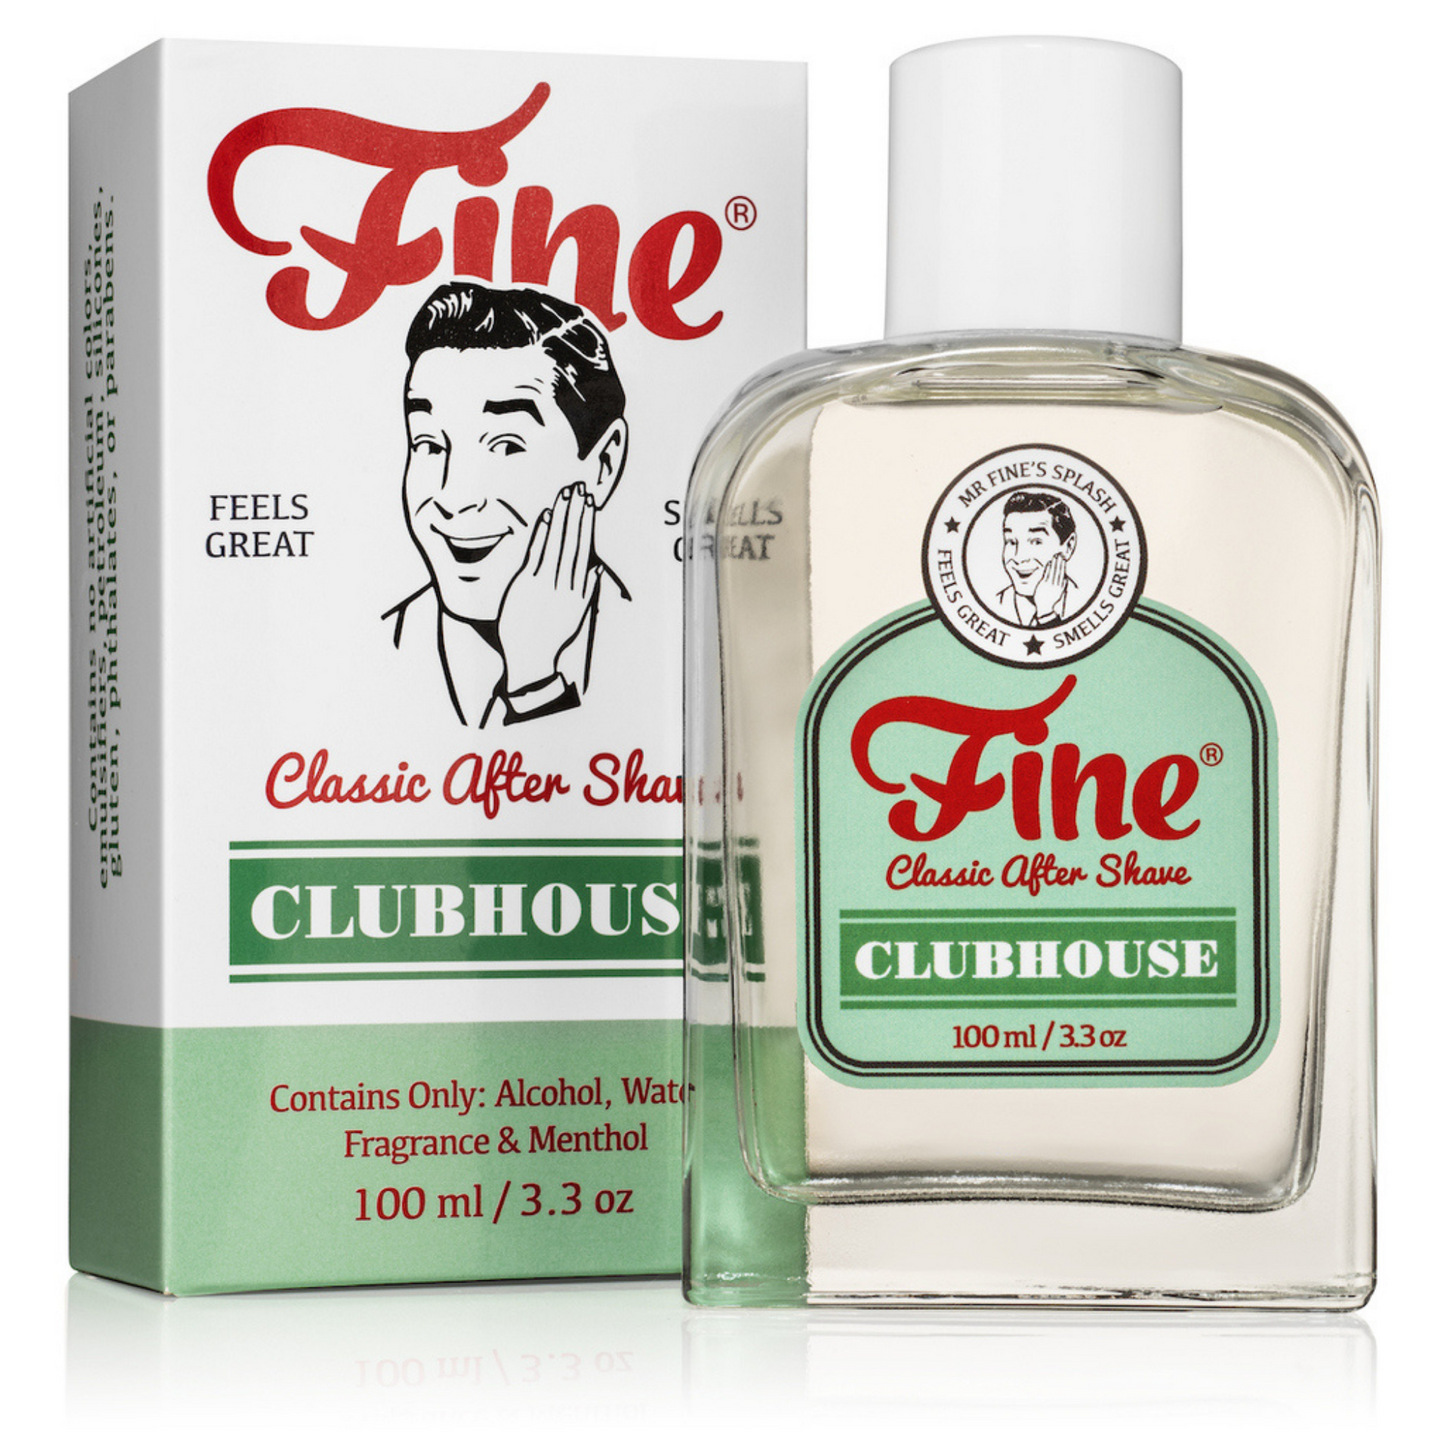 Primary Image of Clubhouse Classic After Shave